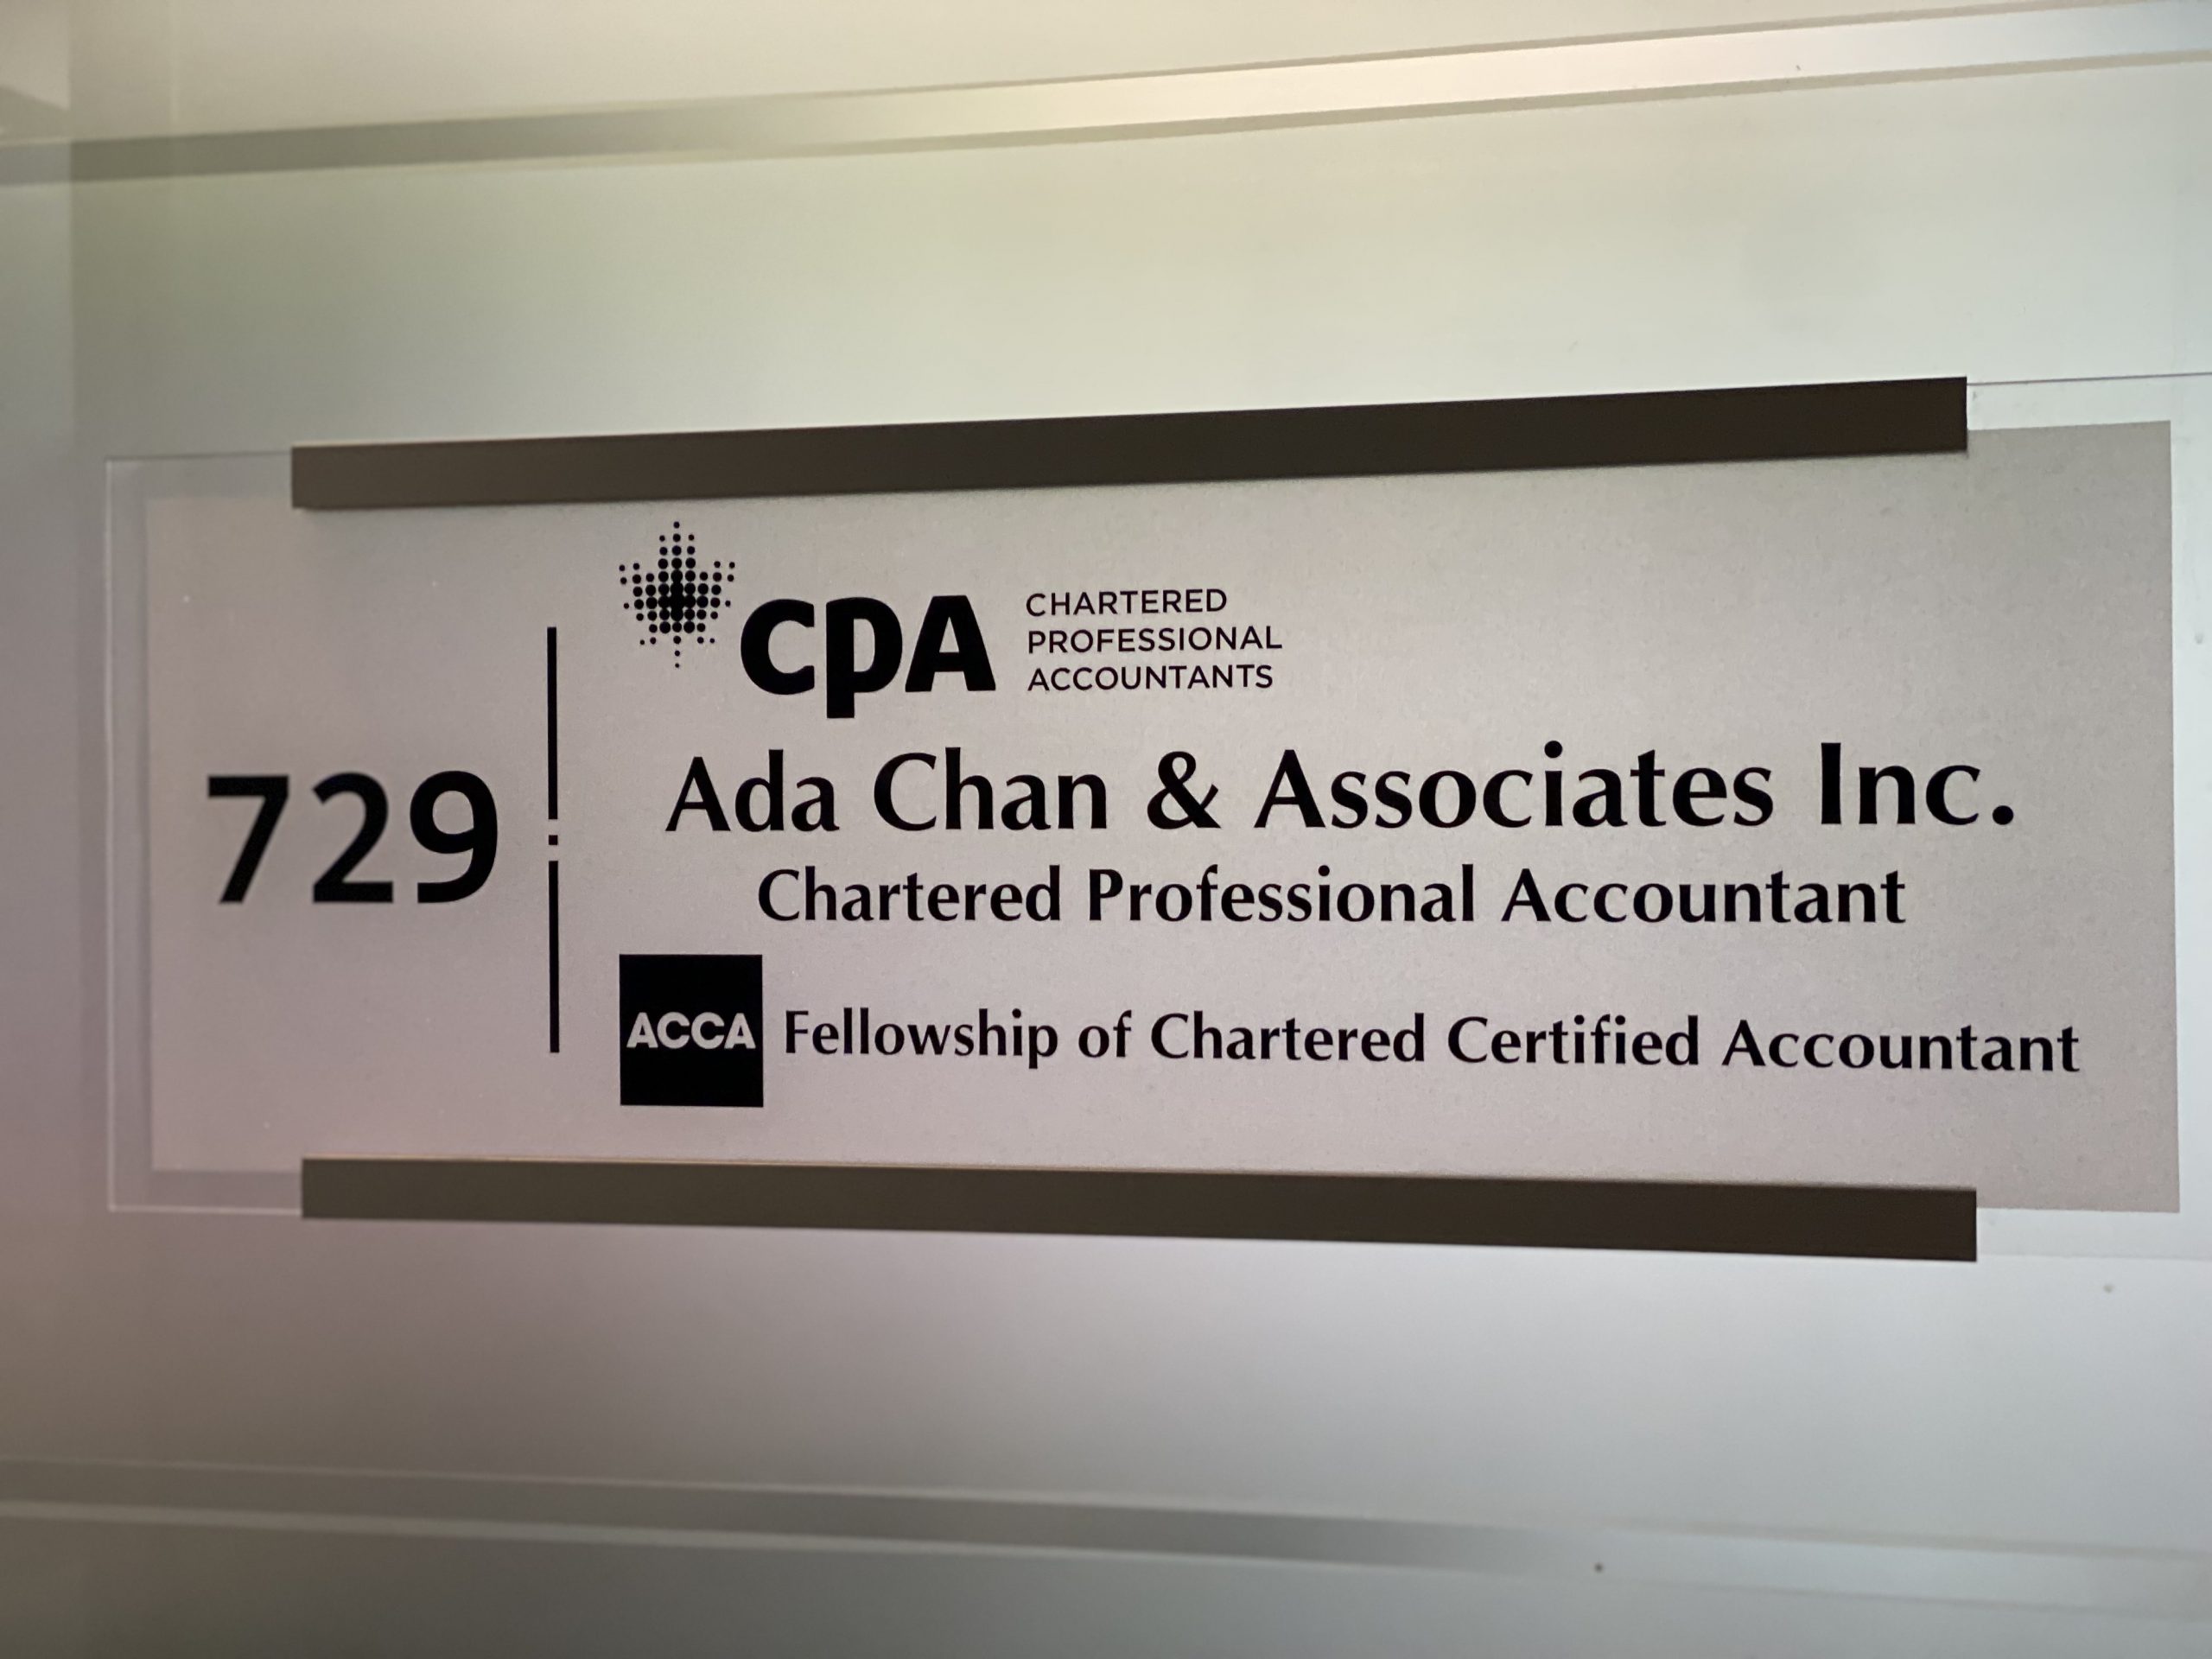 Chartered Public Accountant (CPA) in Richmond